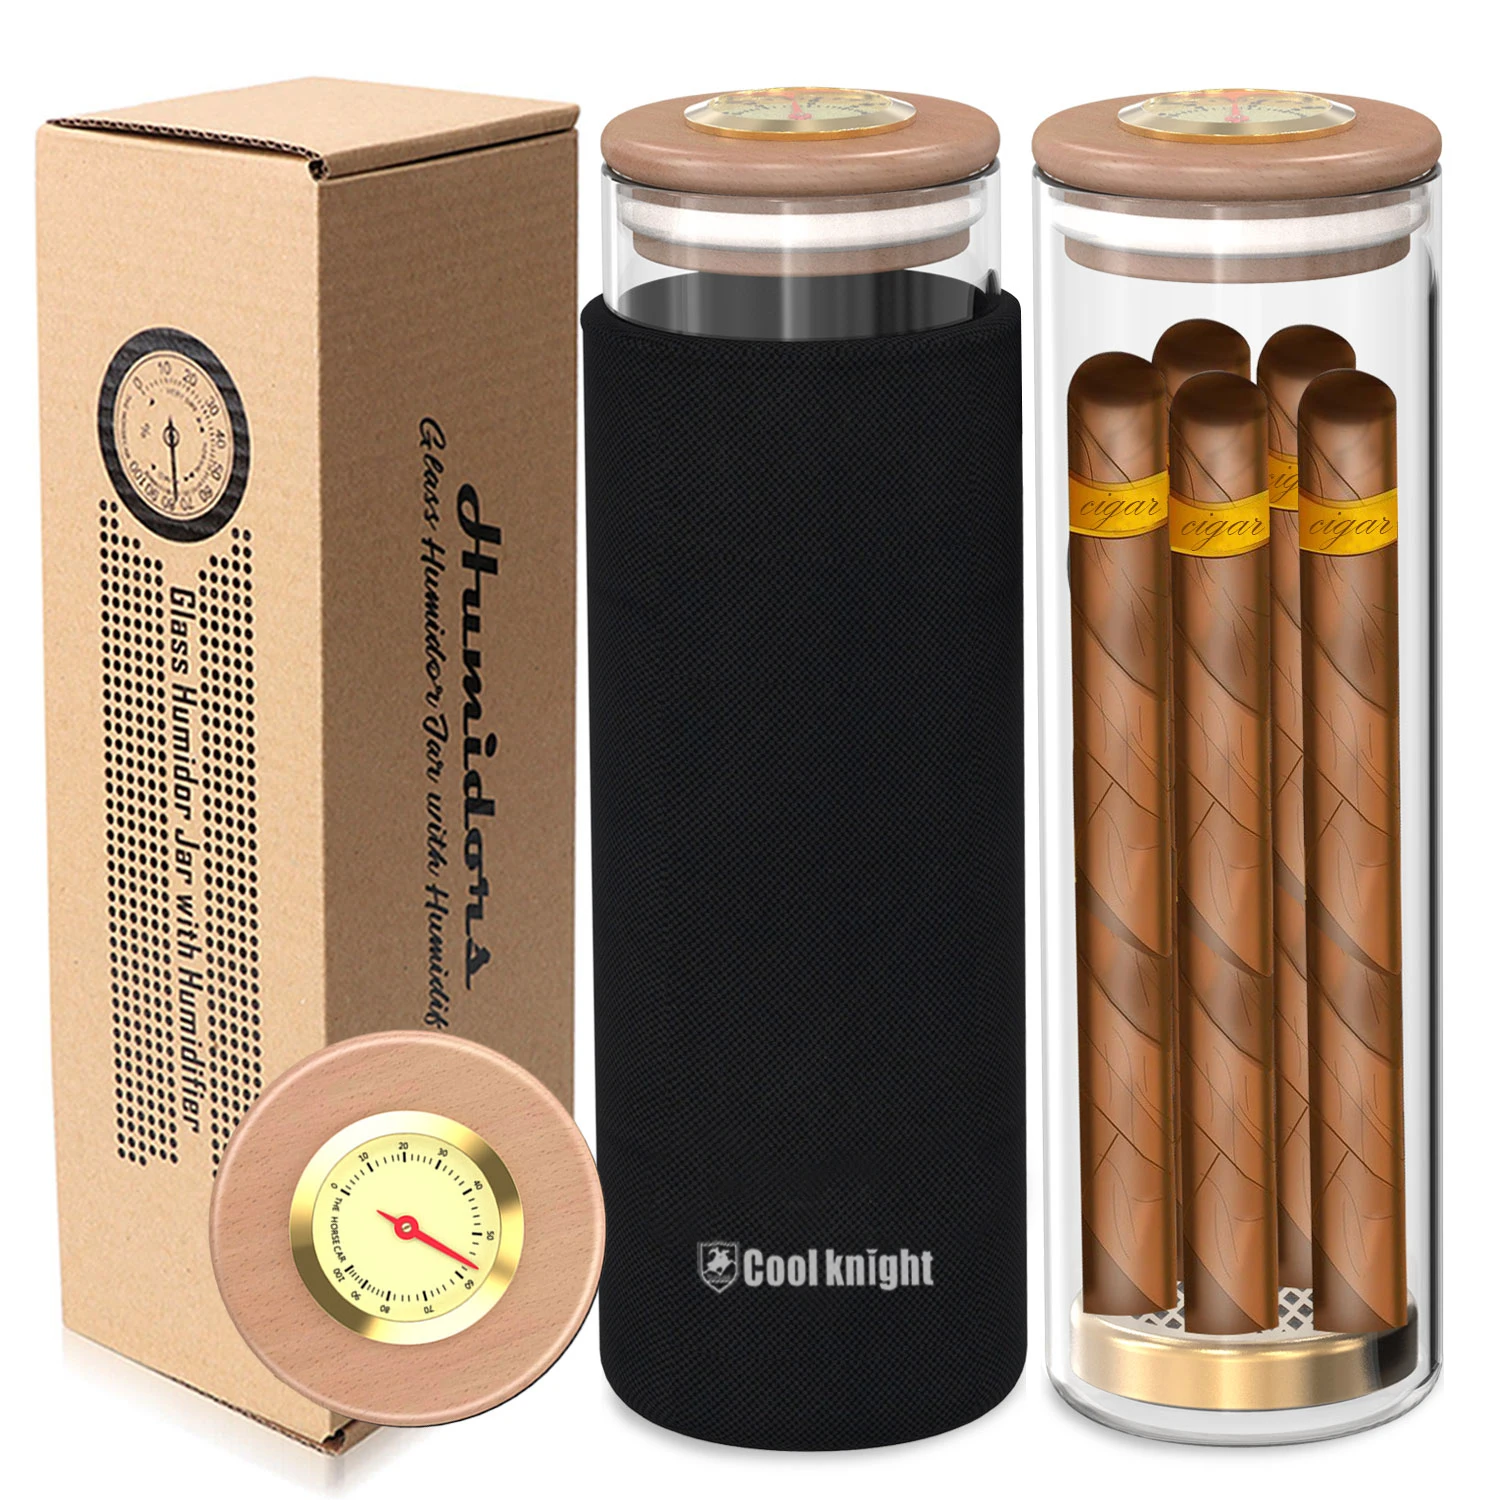 Coolknight Cigar travel case-4 to 5 Cigars